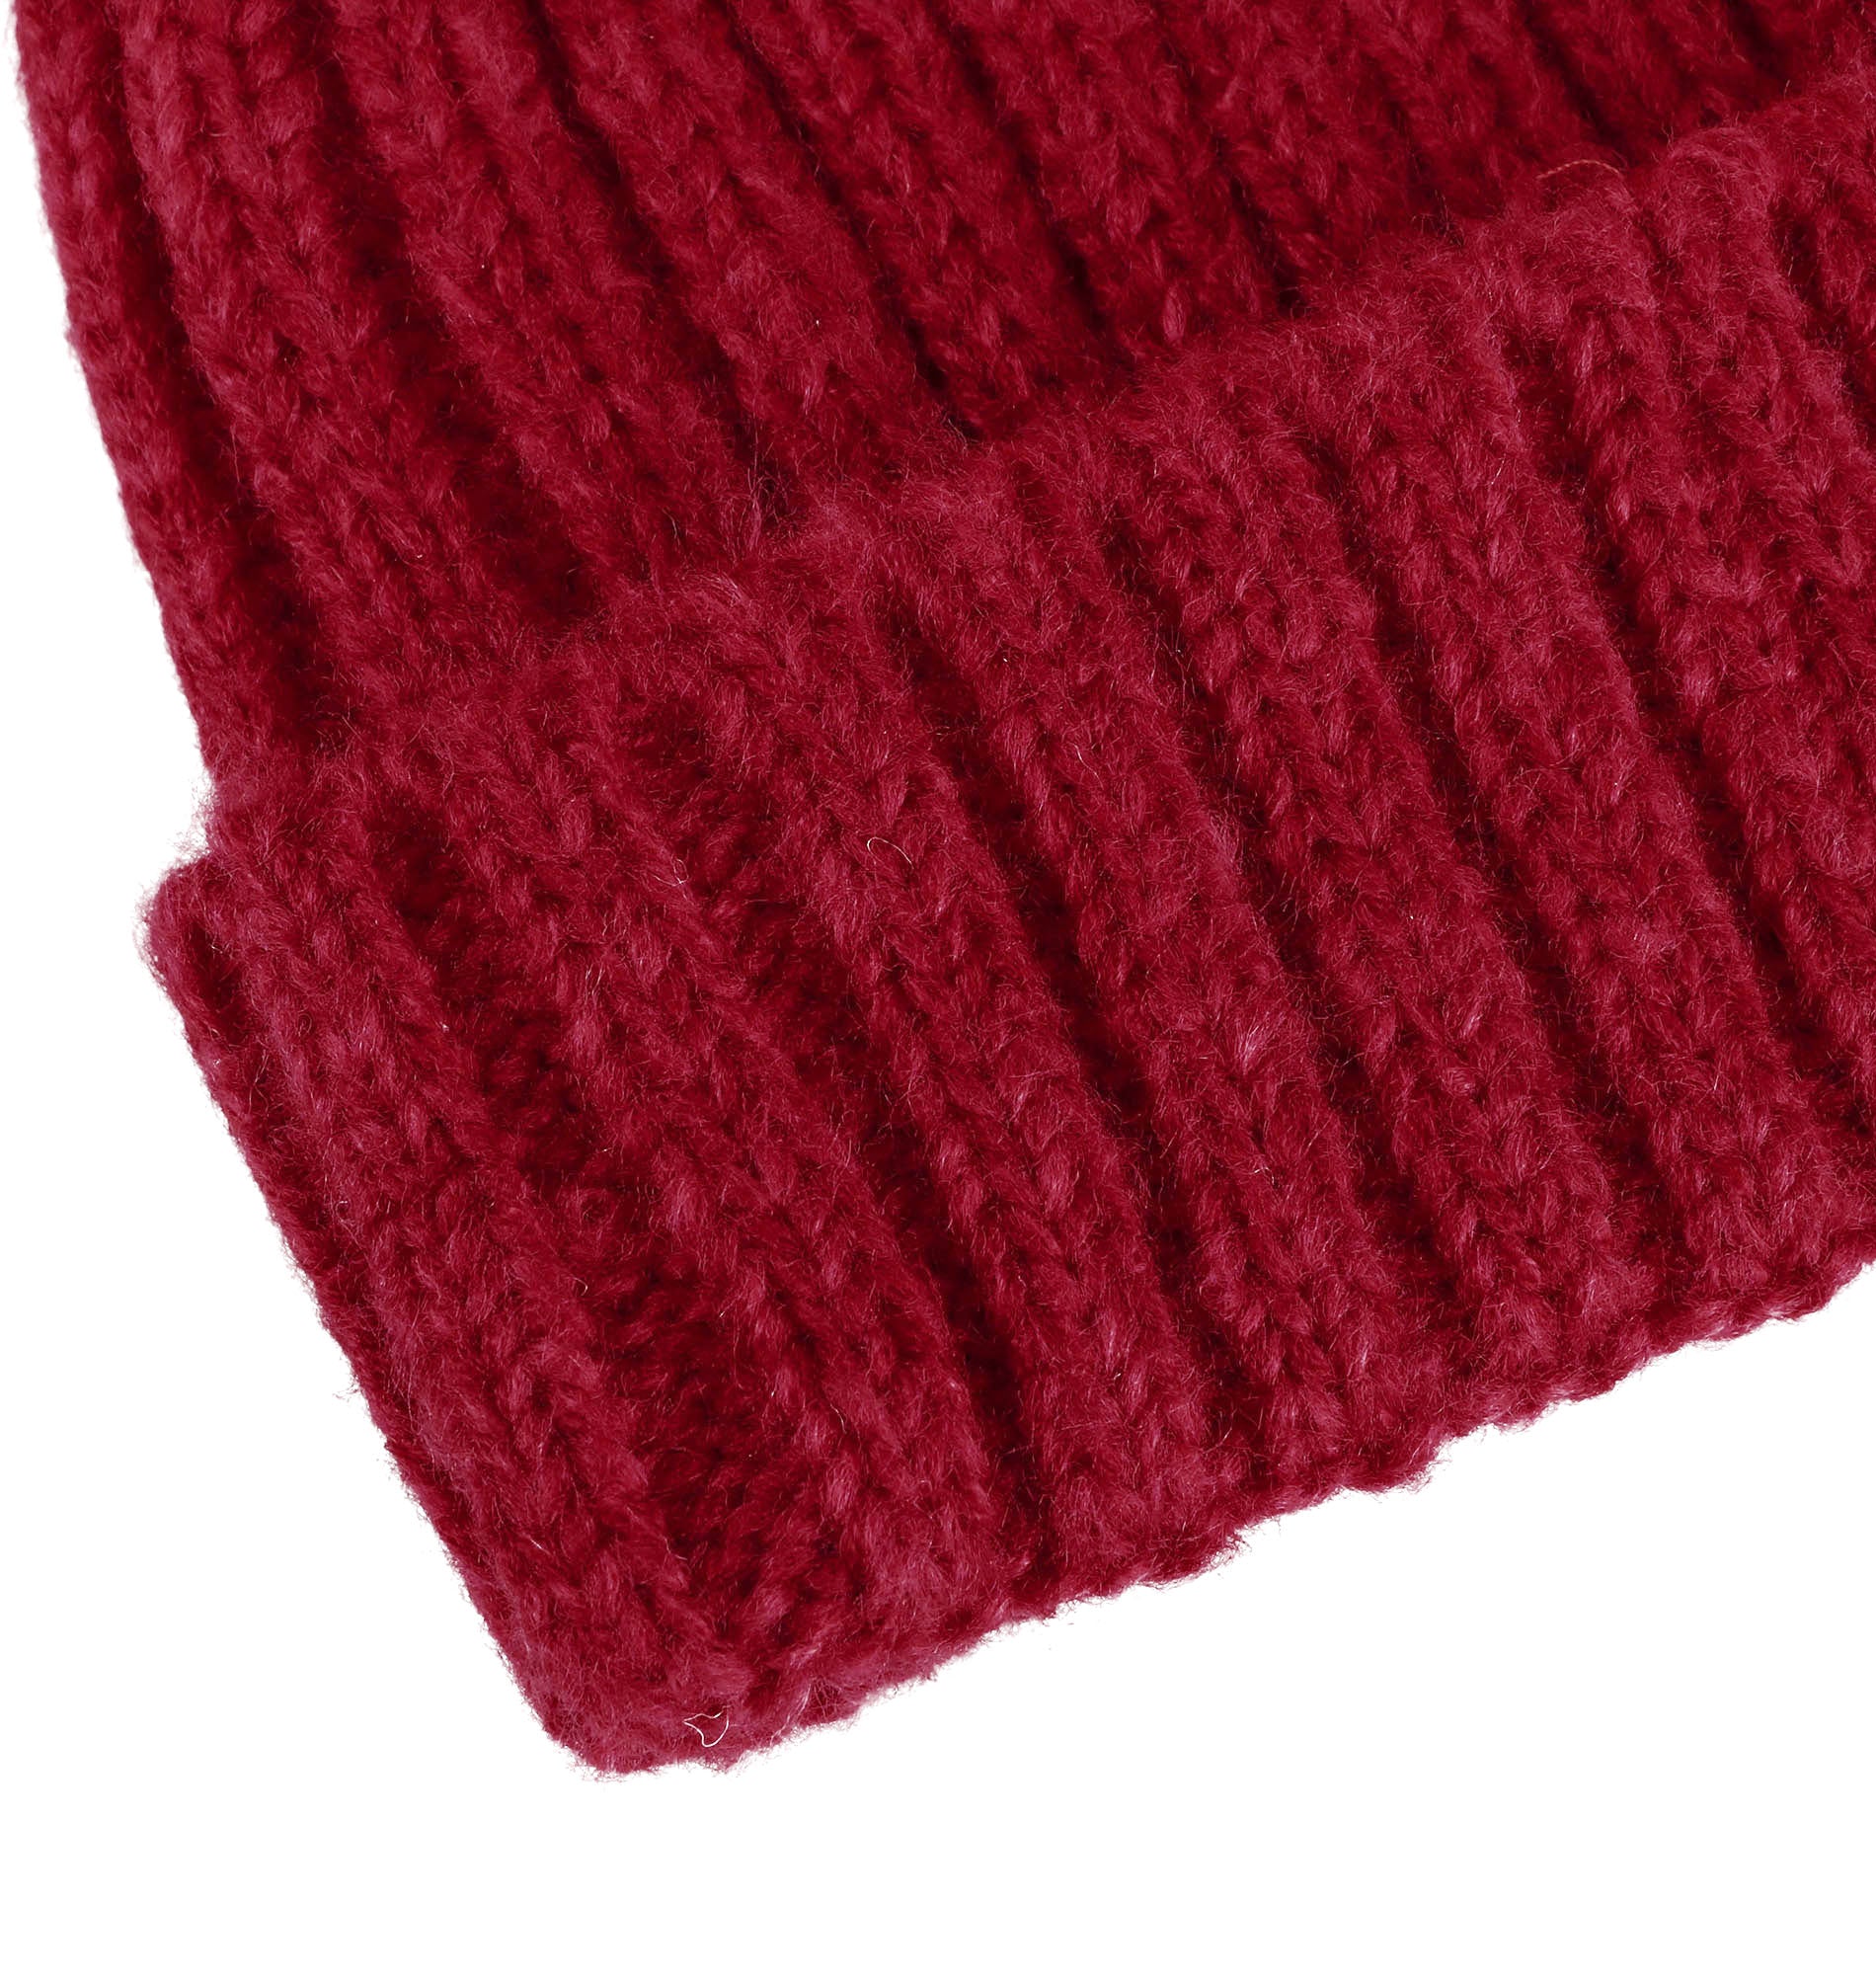 Sherpa Lined Cable Knit Beanie with Faux Fur Pompom Ears